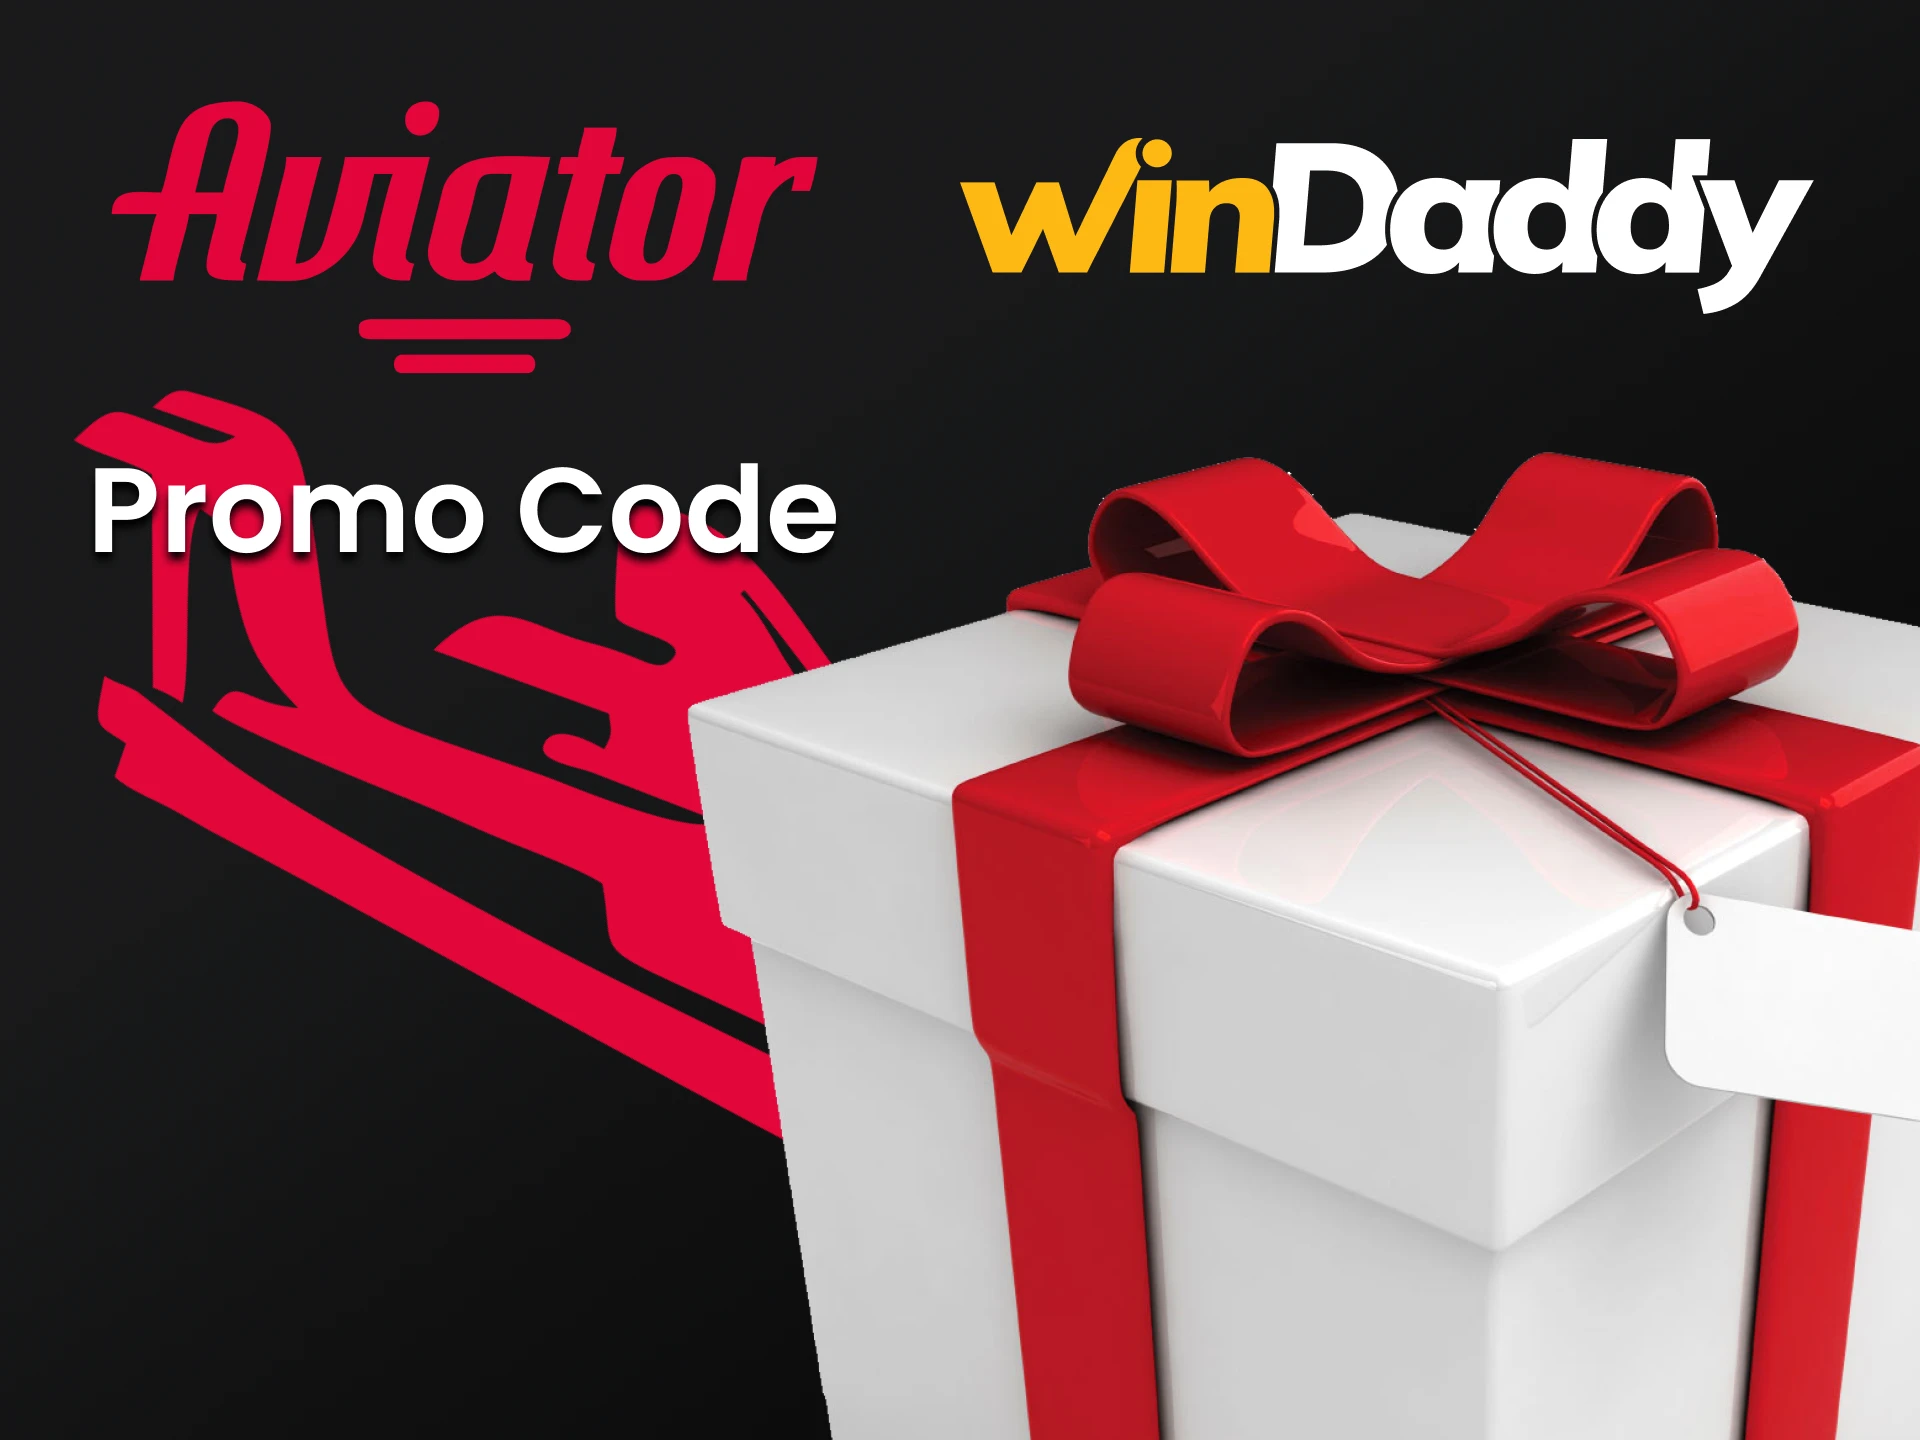 Get a bonus from WinDaddy for playing Aviator.